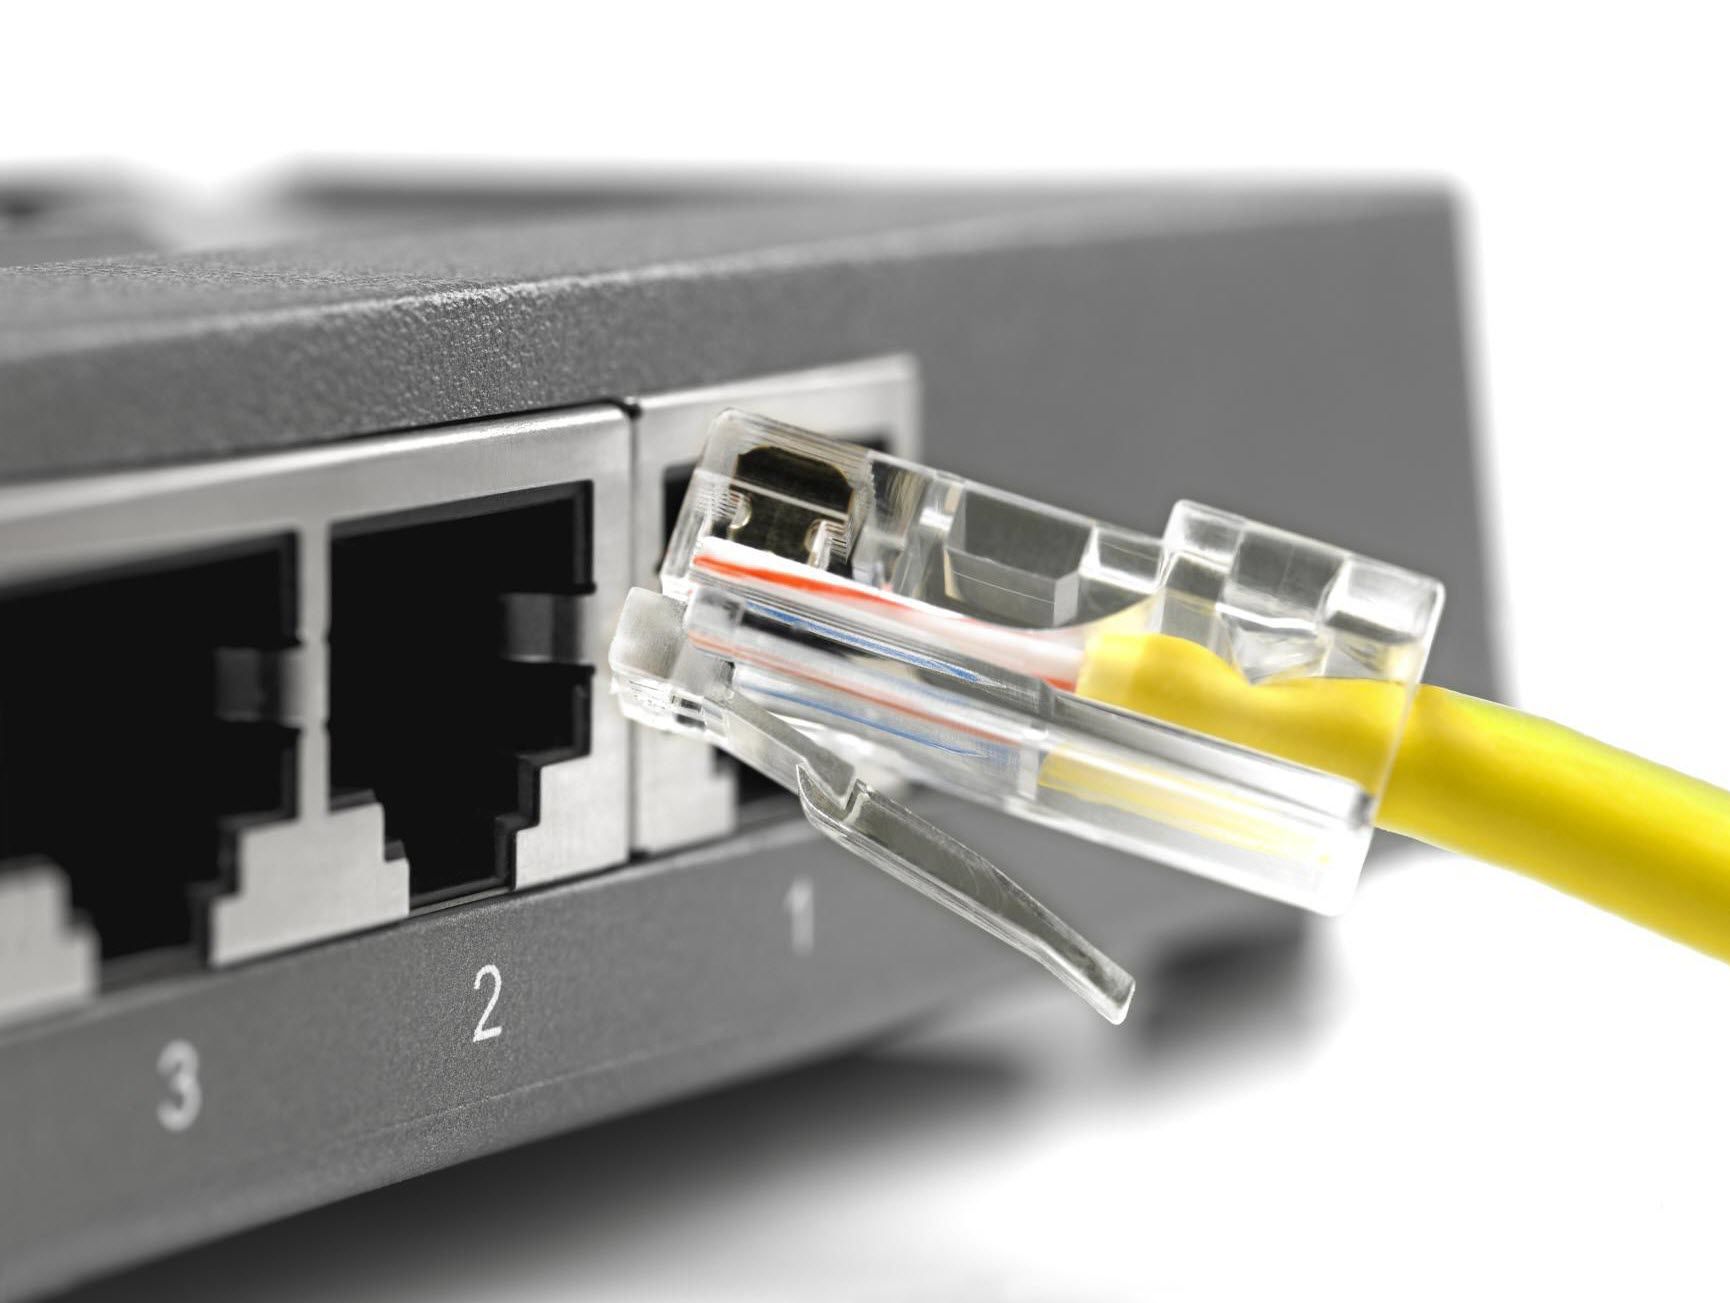 how to solve network cable unplugged problem